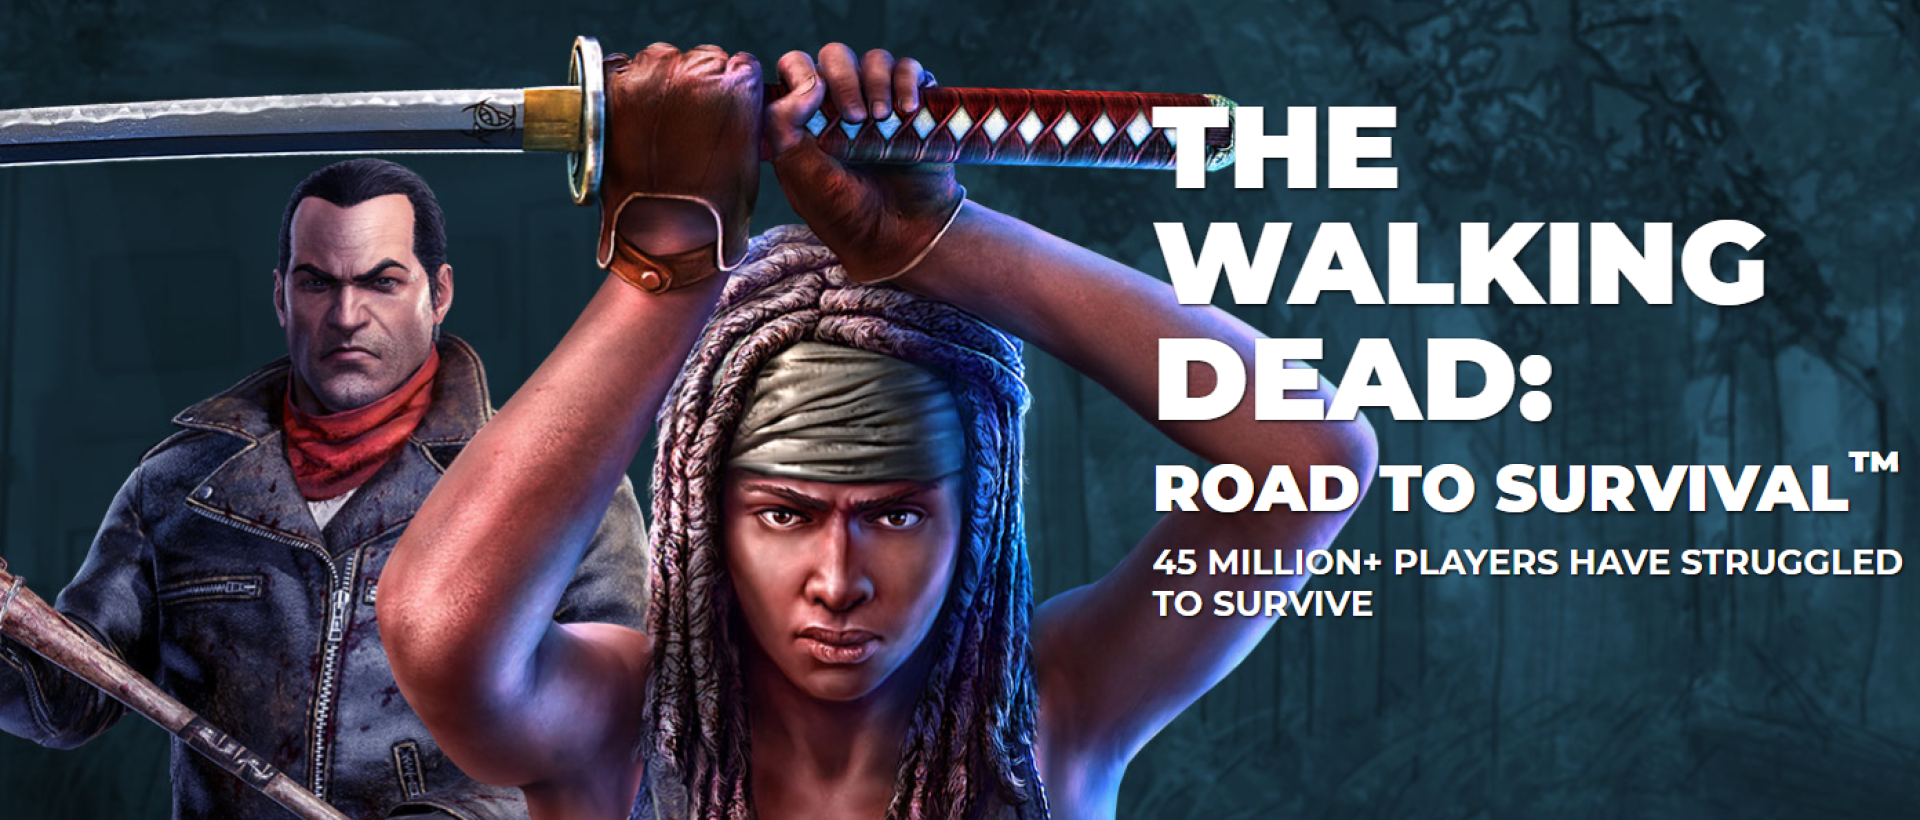 download the walking dead road to survival account for free